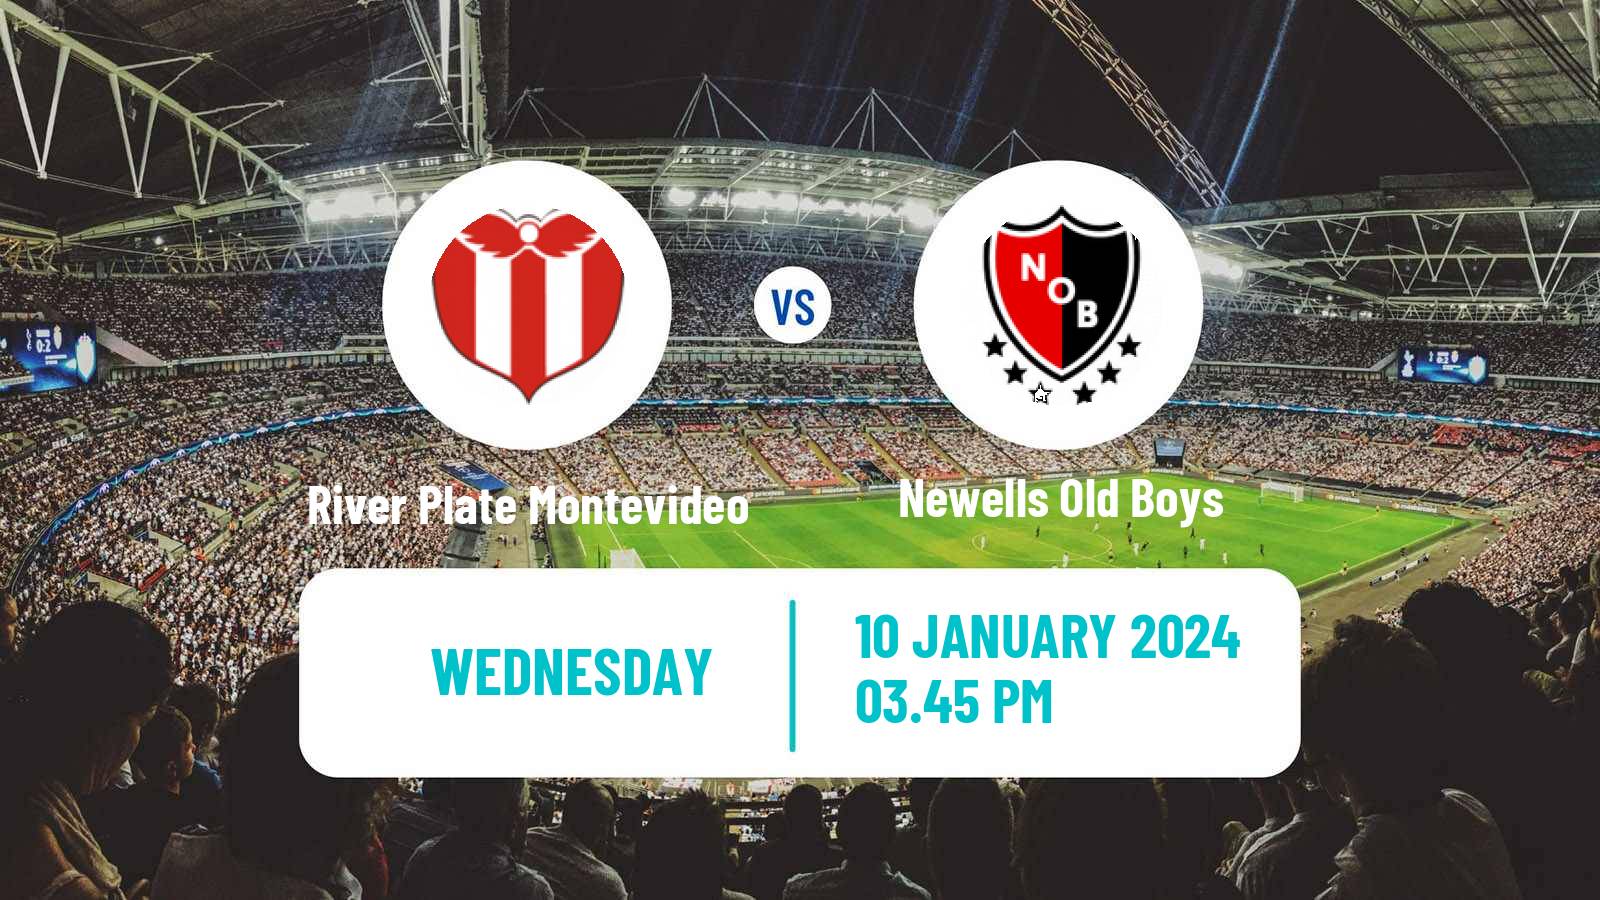 Soccer Club Friendly River Plate Montevideo - Newells Old Boys